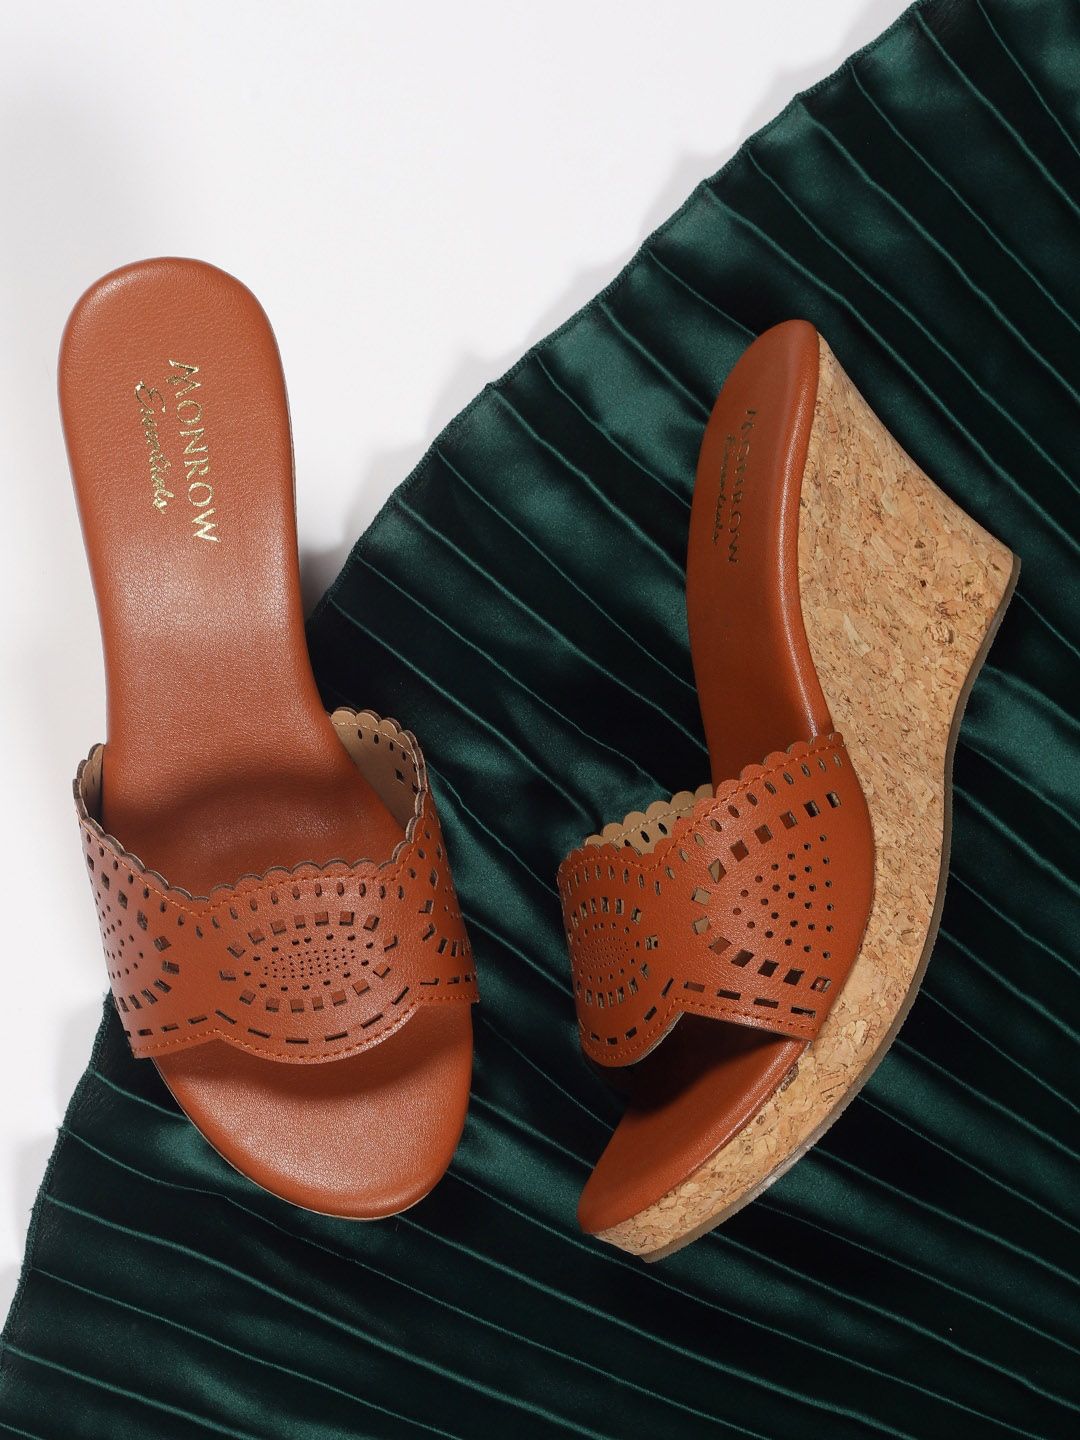 Monrow Tan PU Party Wedge Sandals with Laser Cuts Price in India